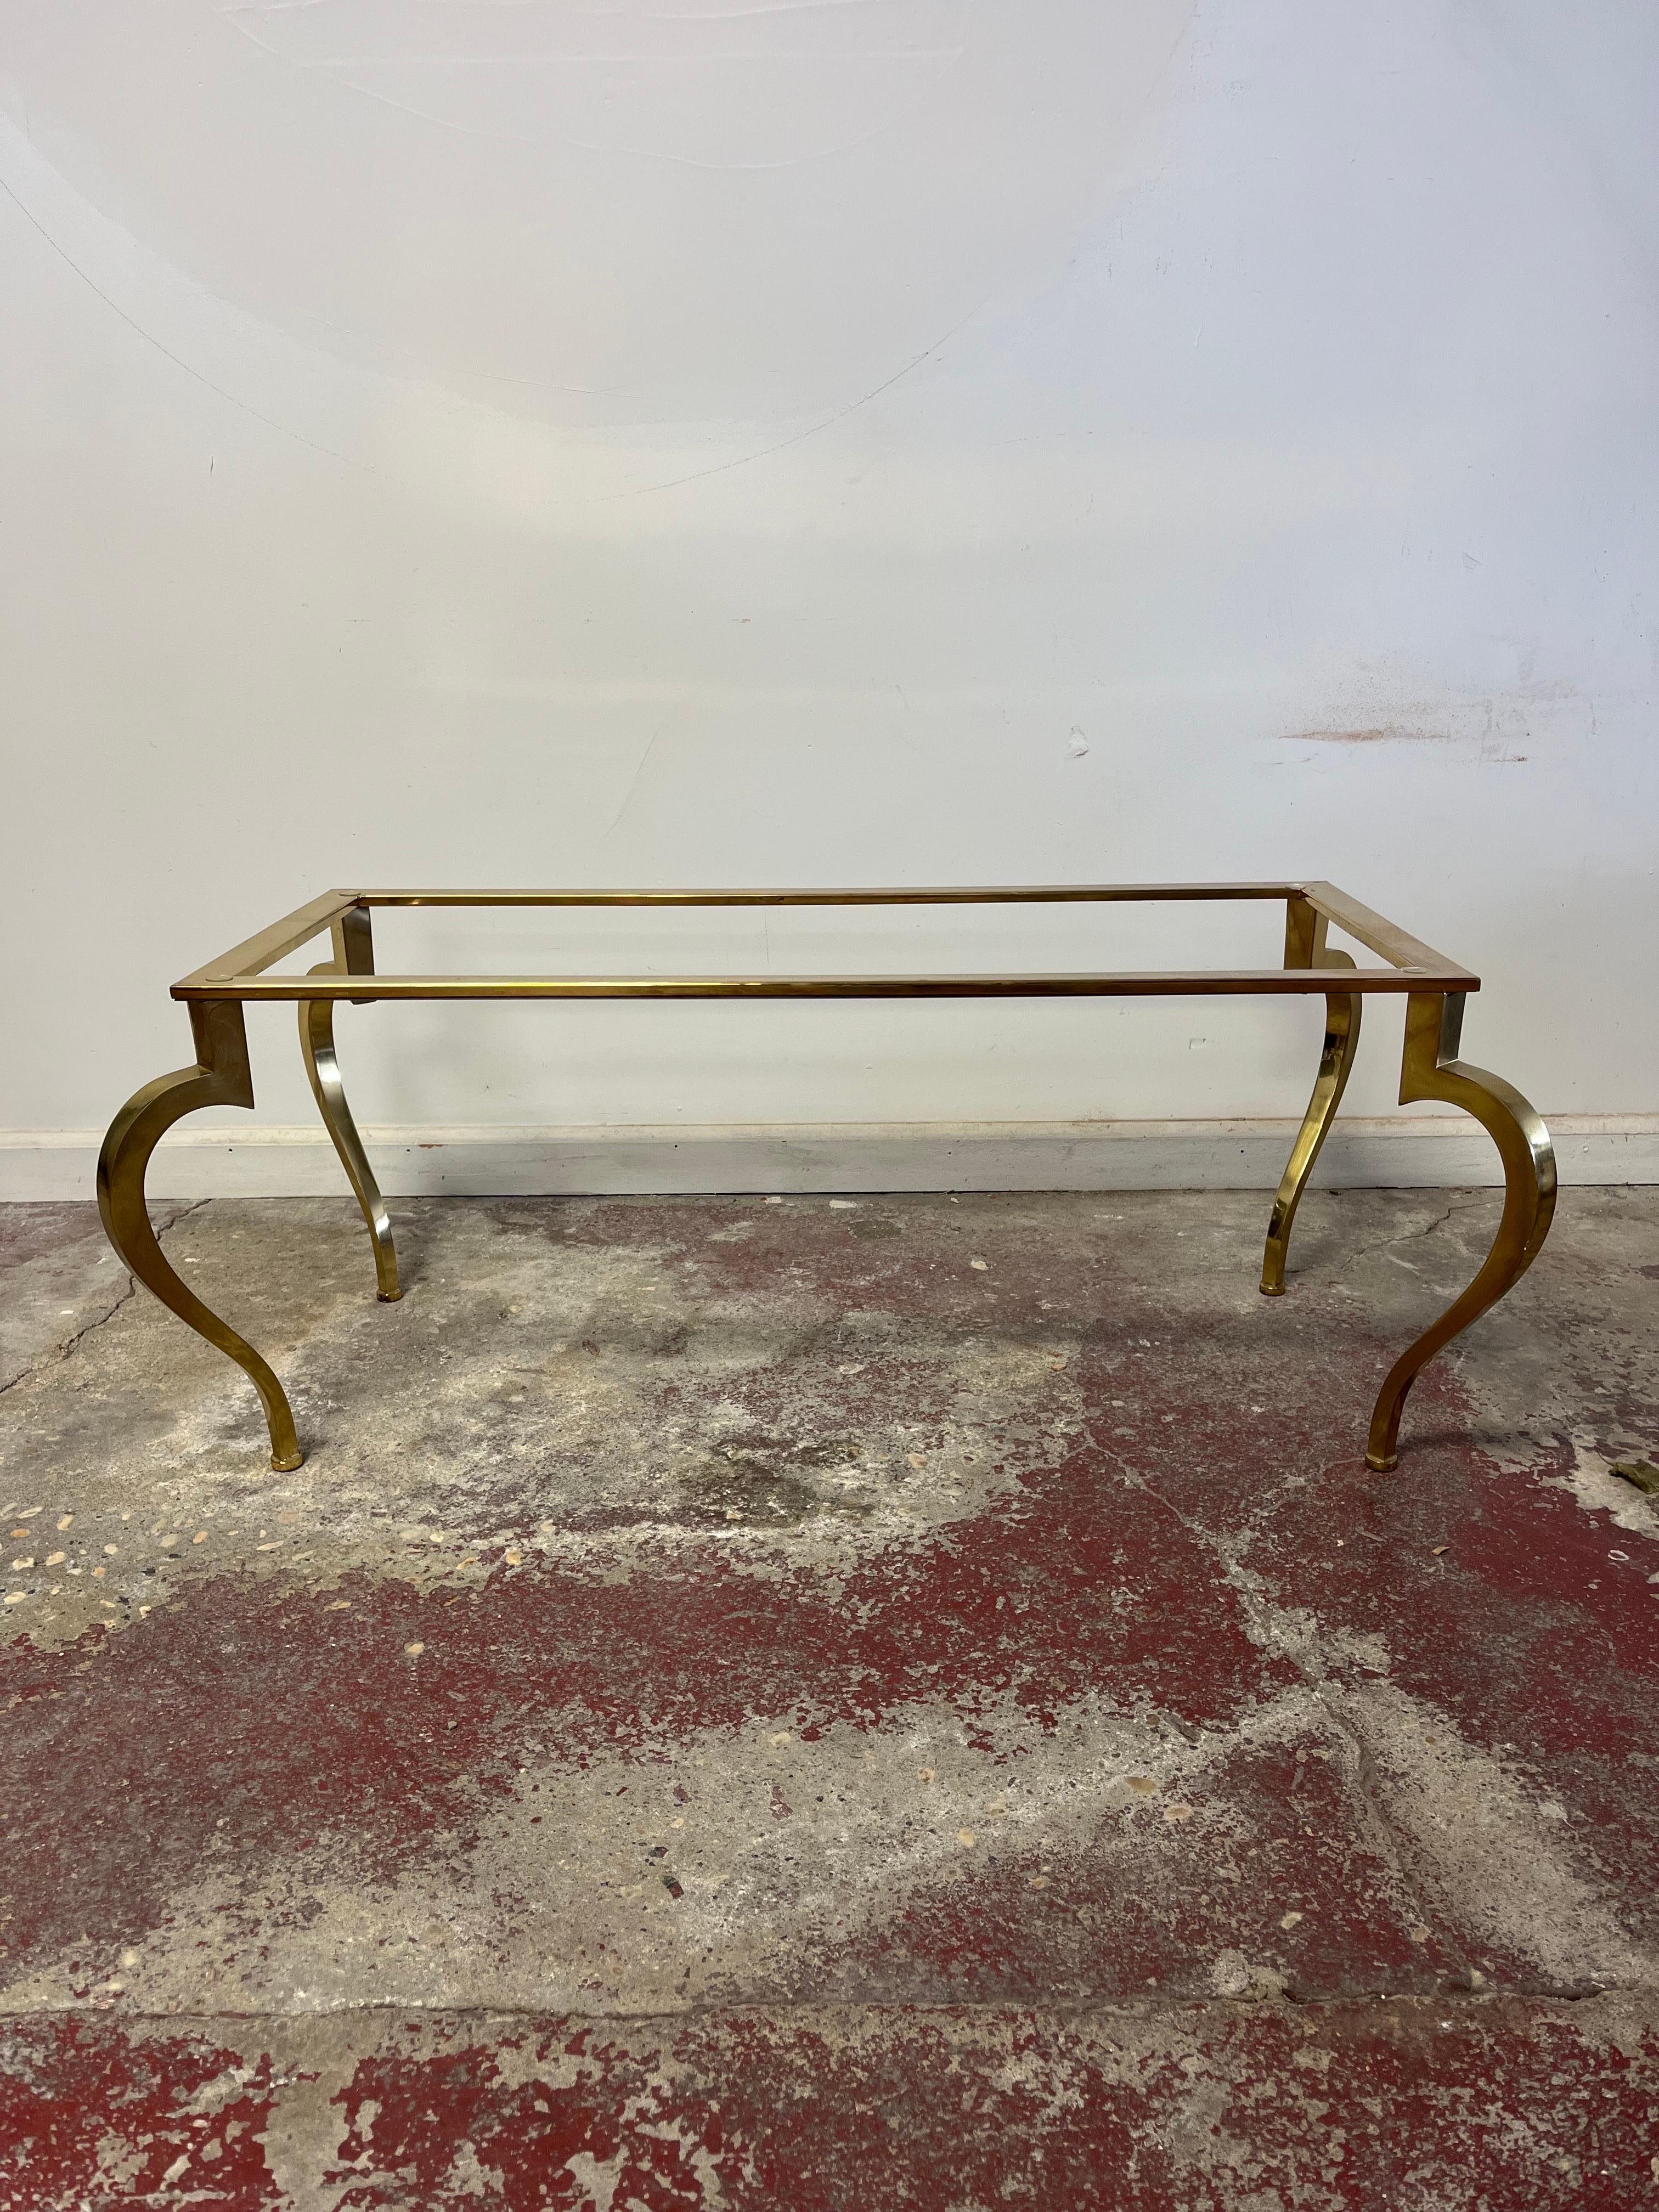 A circa 1950s coffee and French cocktail table in the Hollywood Regency style in the manner of Maison Ramsay with brass frame and cabriole legs. Very good vintage condition, with some age appropriate wear.

5/8